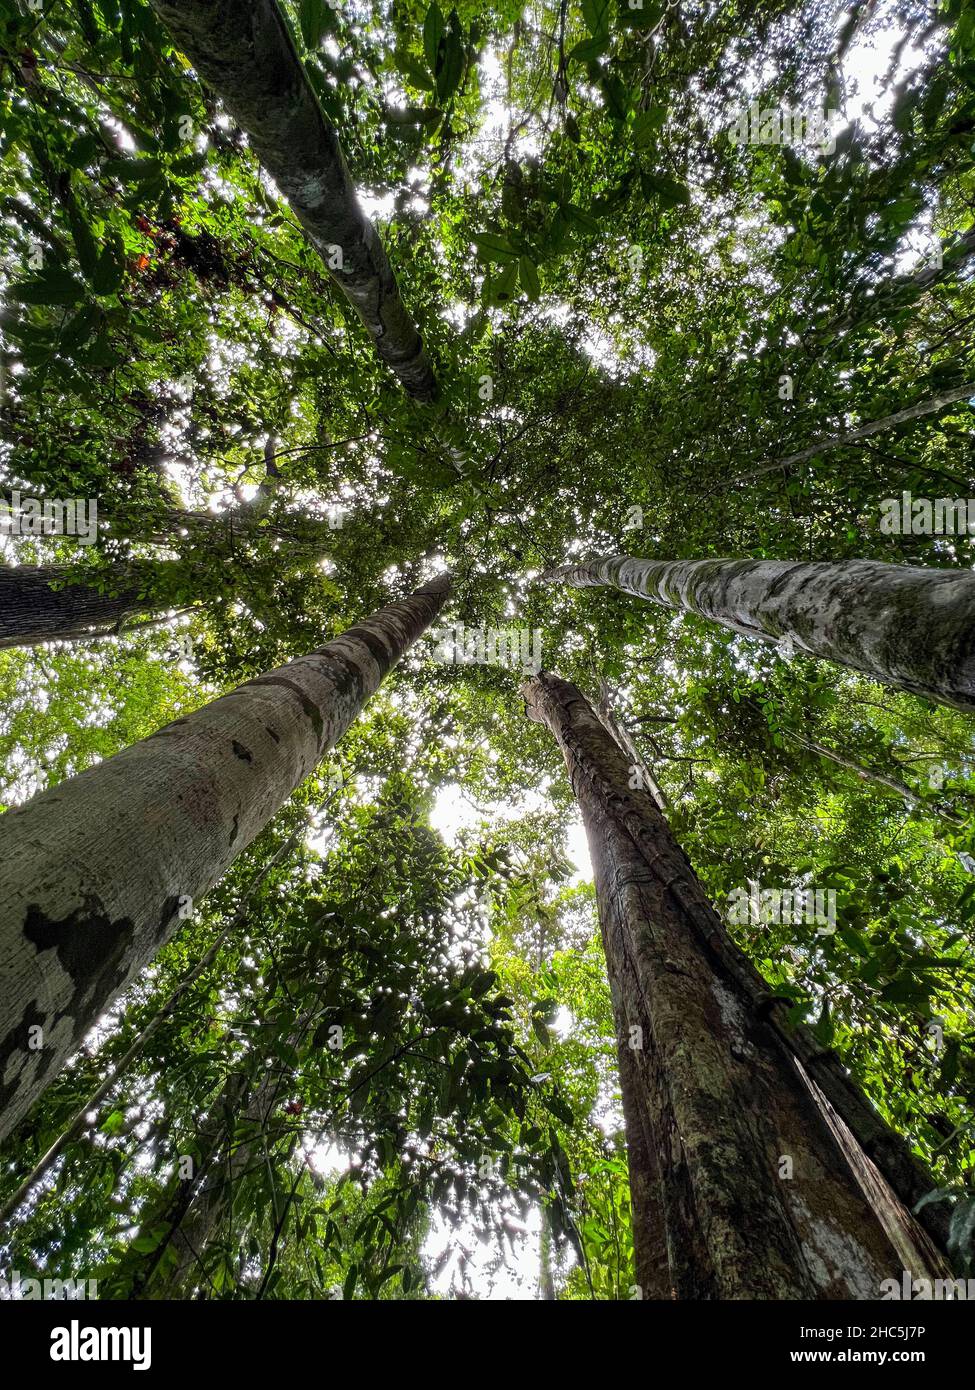 These are the Amazon trees that keep the planet cool. Typical amazon rainforest, located in Alter do Chao, State of Para, Brazil Stock Photo